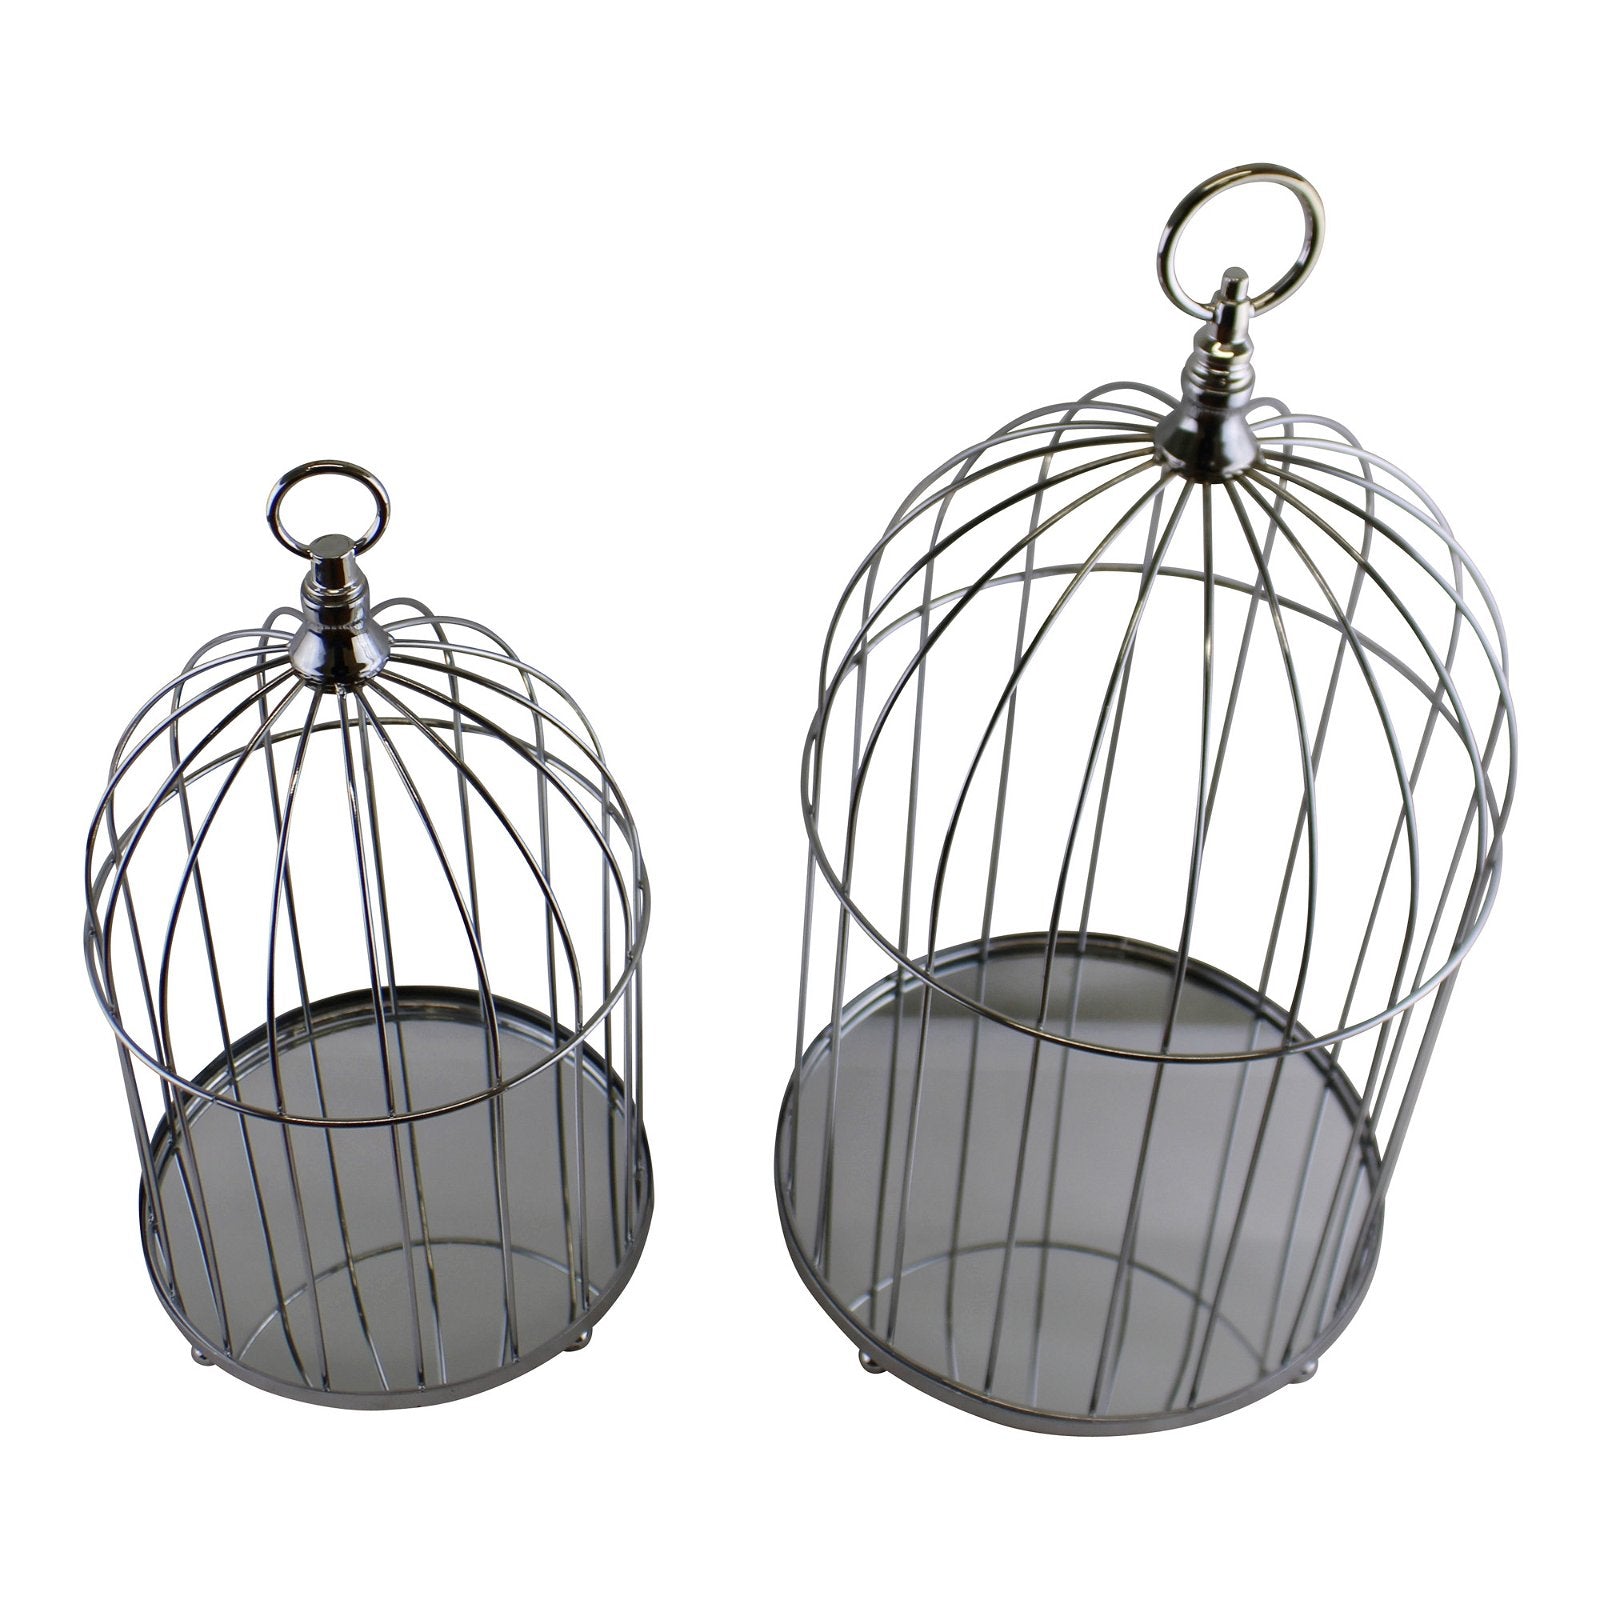 Set of 2 Mirrored Base Decorative Birdcages